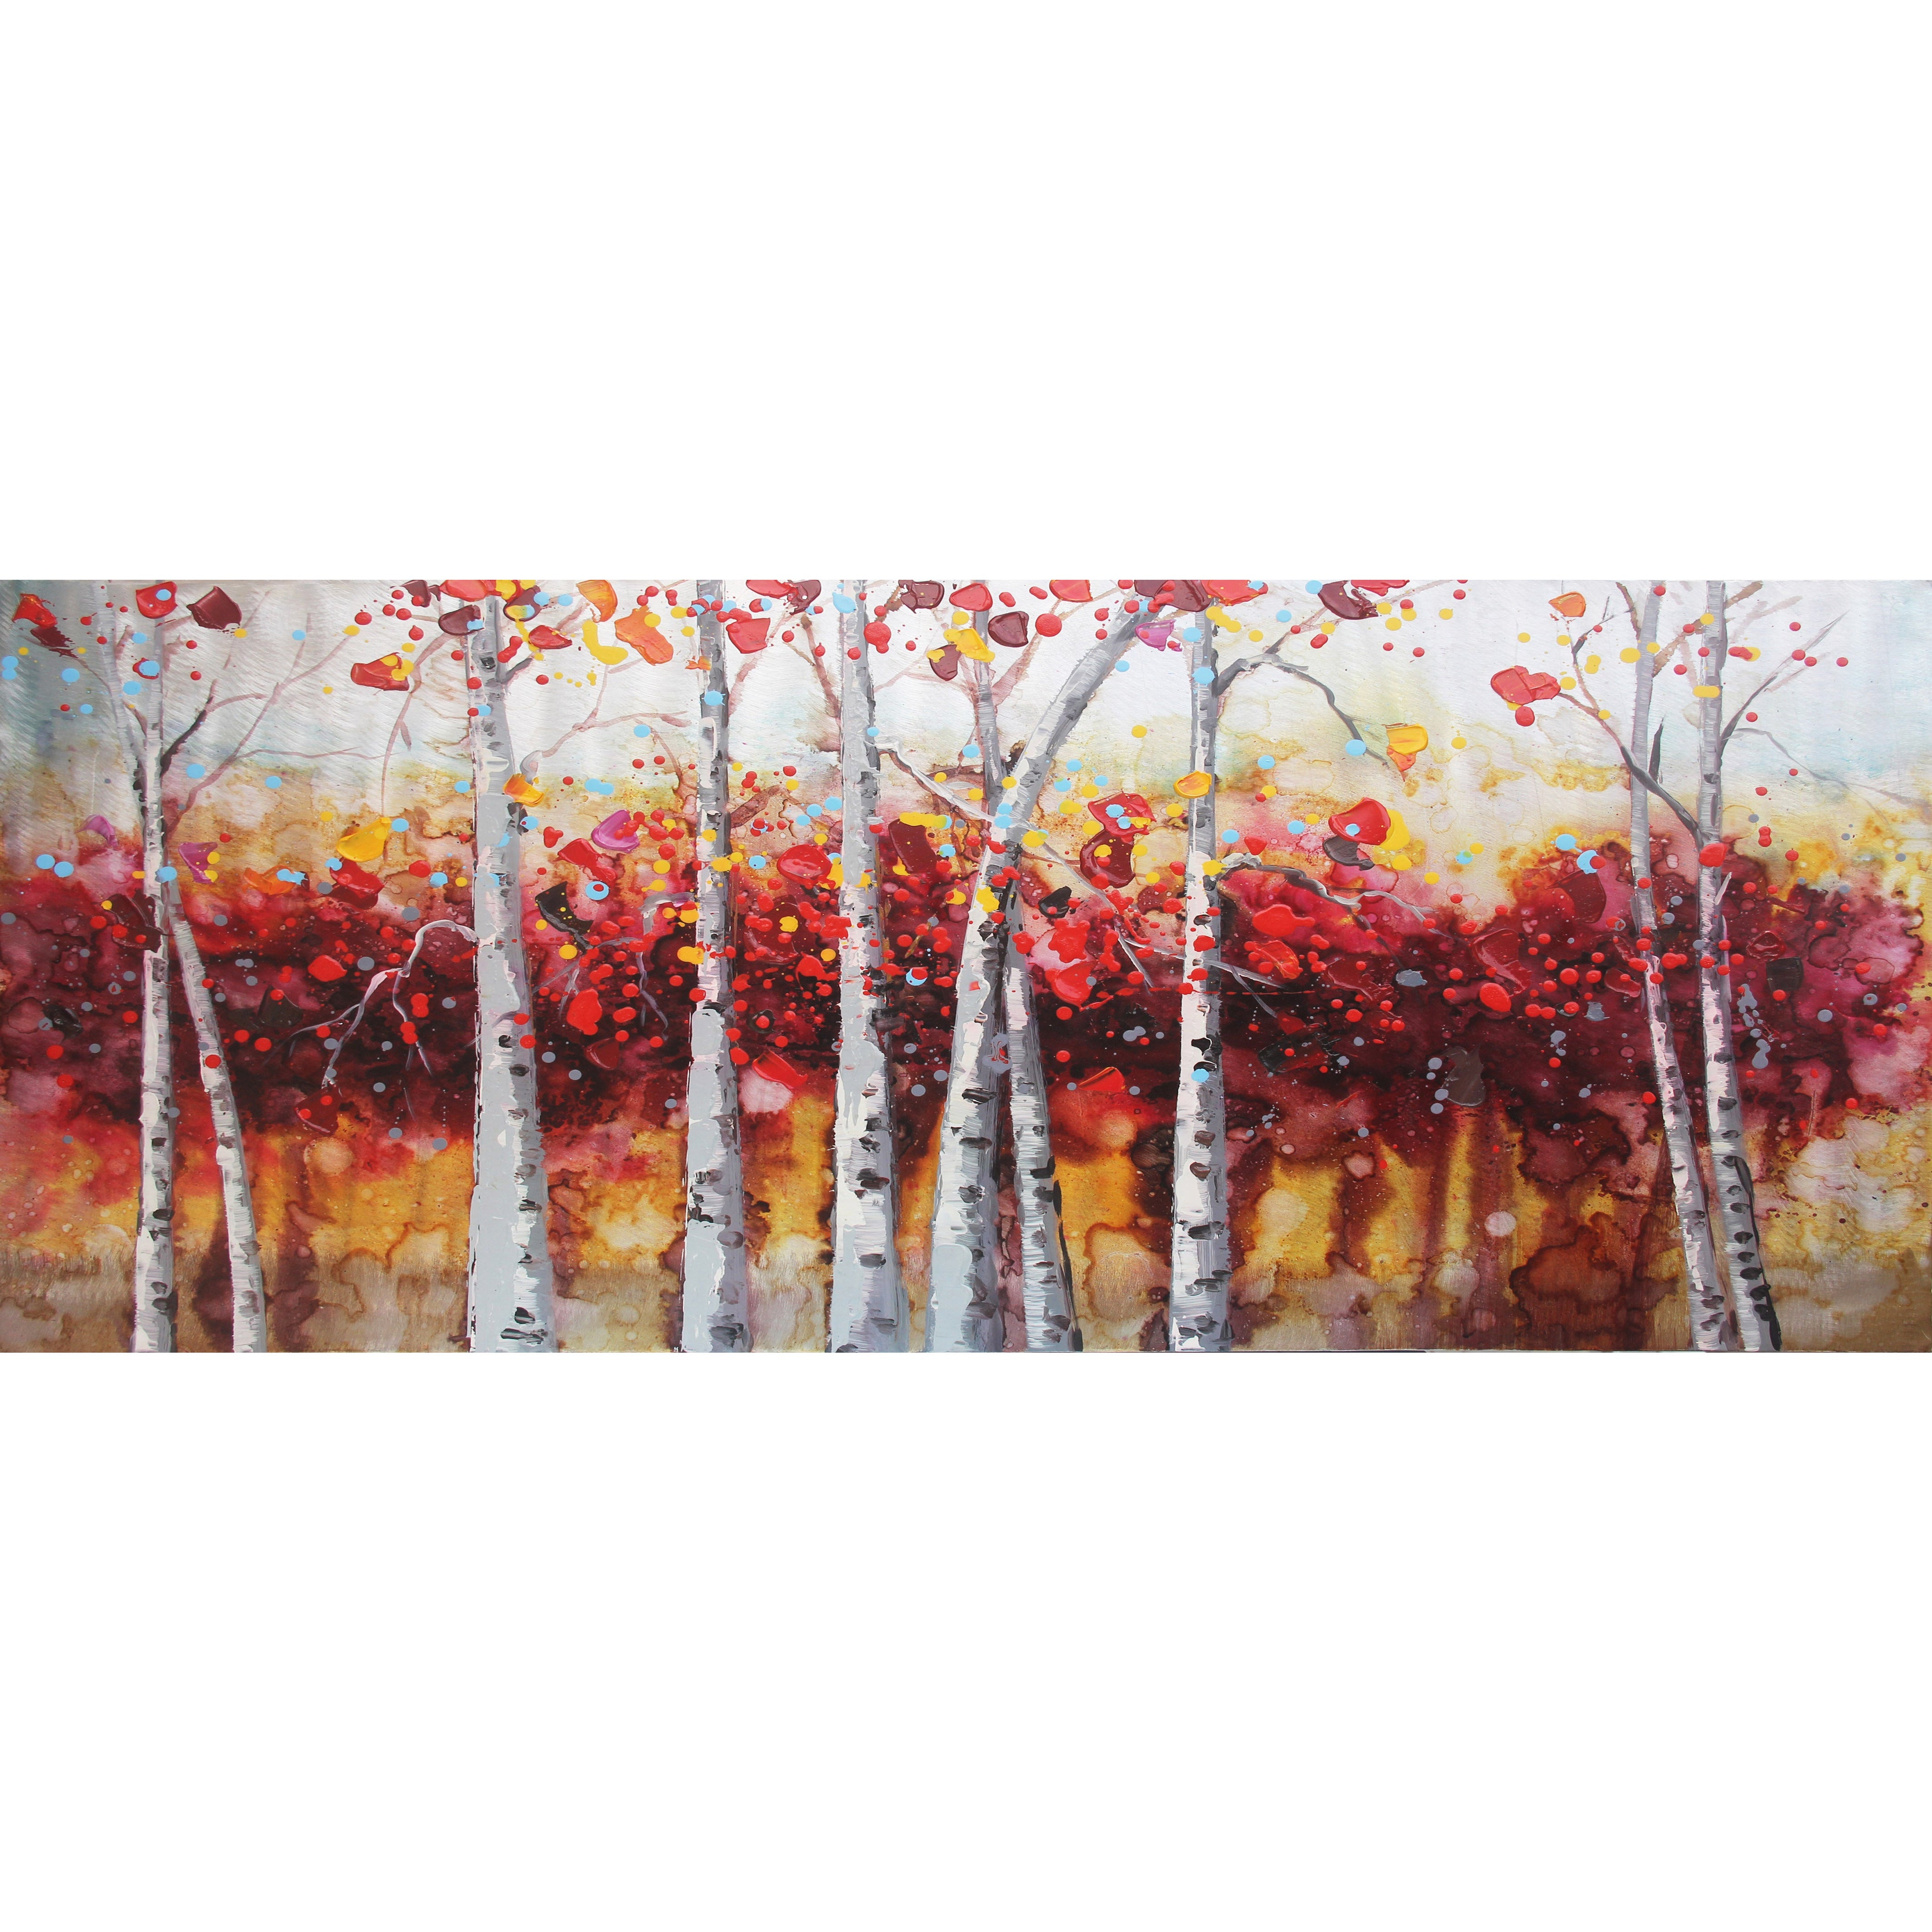 Oil painting | 60x150 cm | Painting | p6203